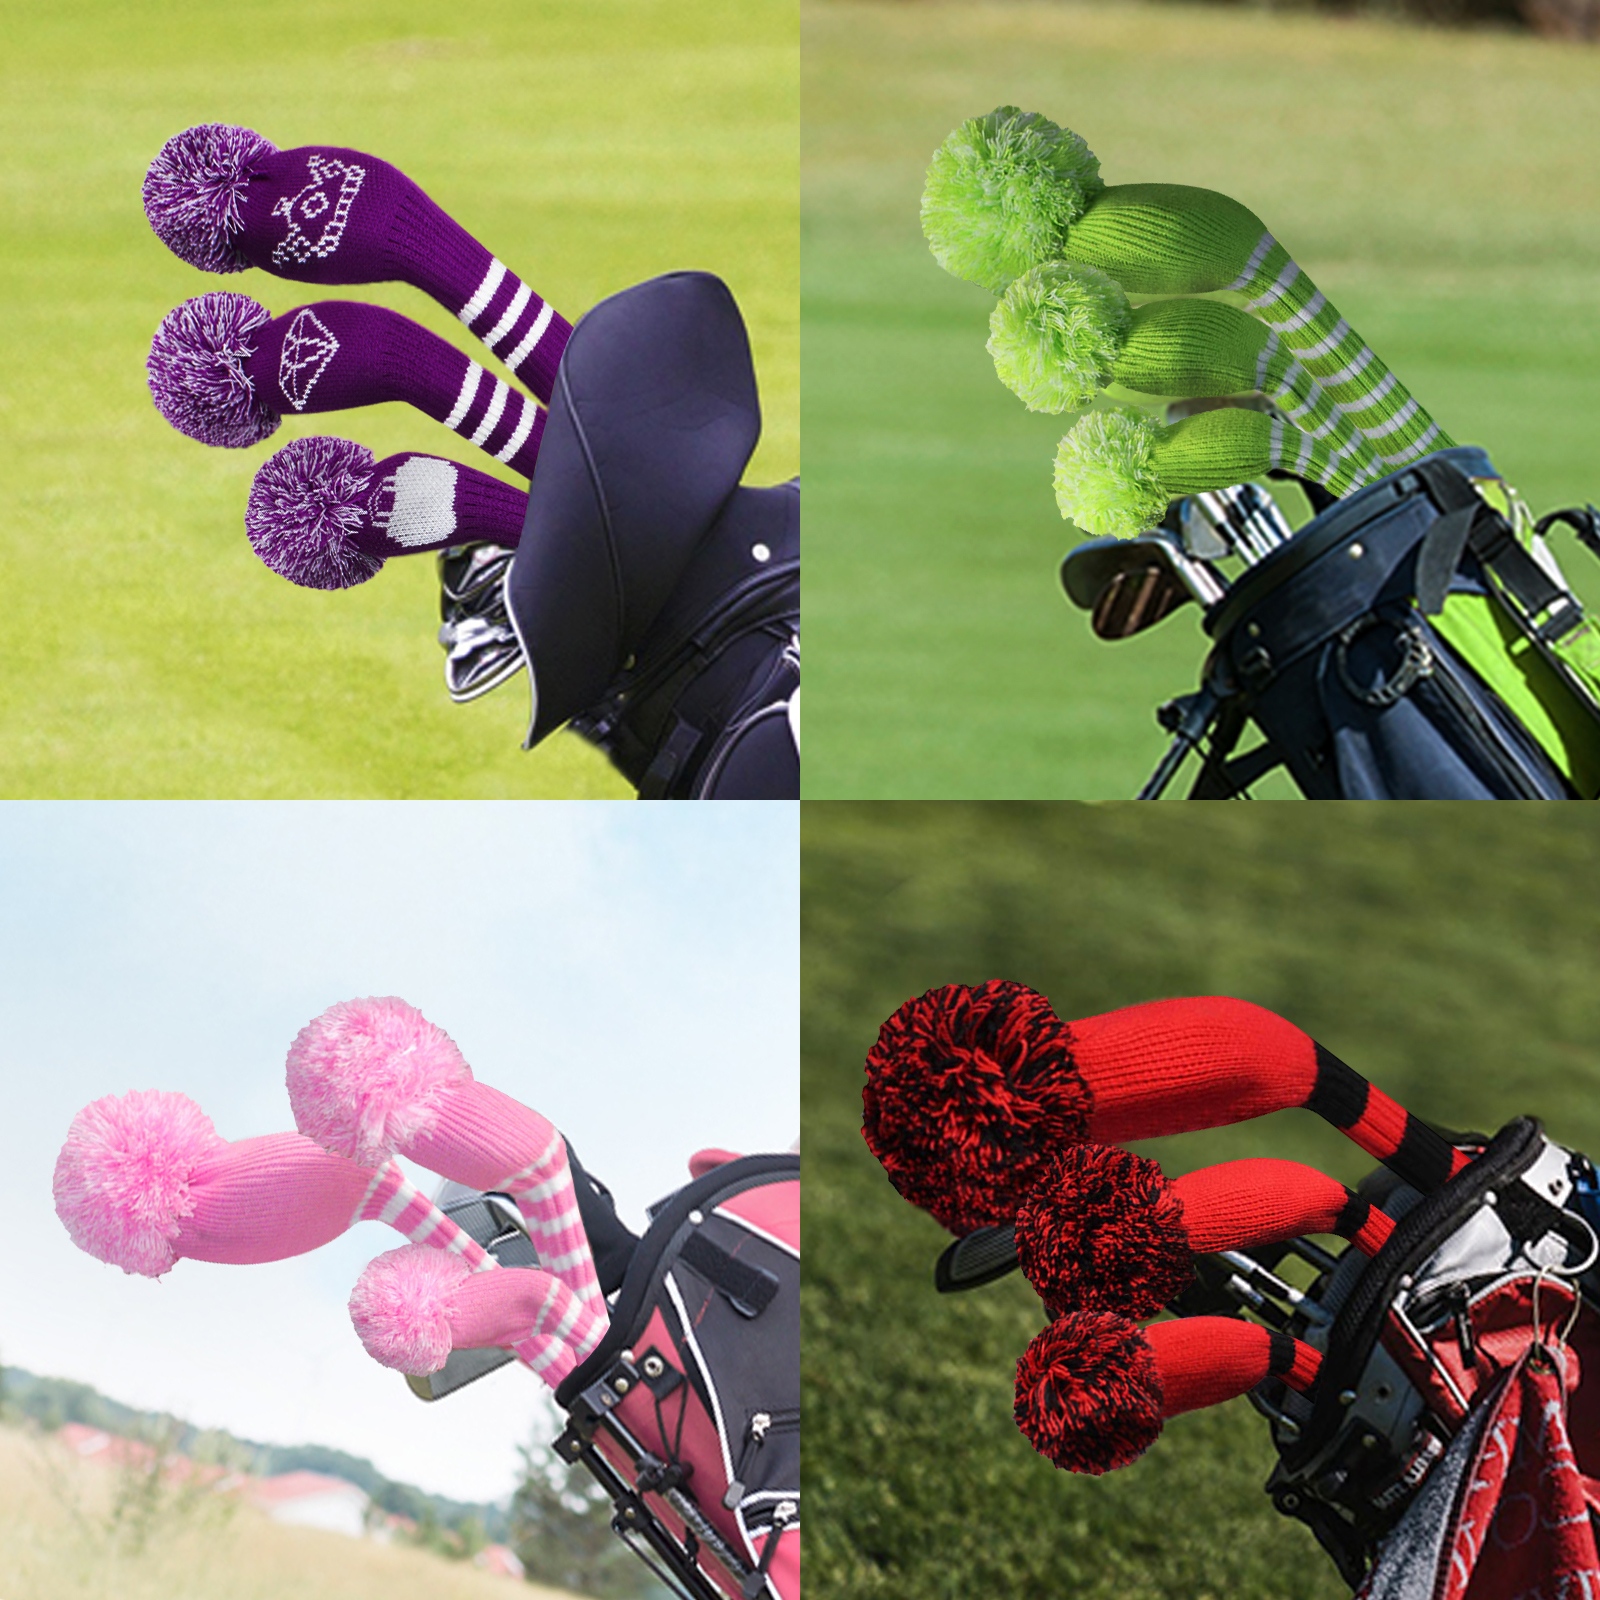 Scott Edward Custom Pom Pom Golf Head Covers Fit Max Drivers Fairways Hybrids/Utility with Rotating Number Tags (Pink)